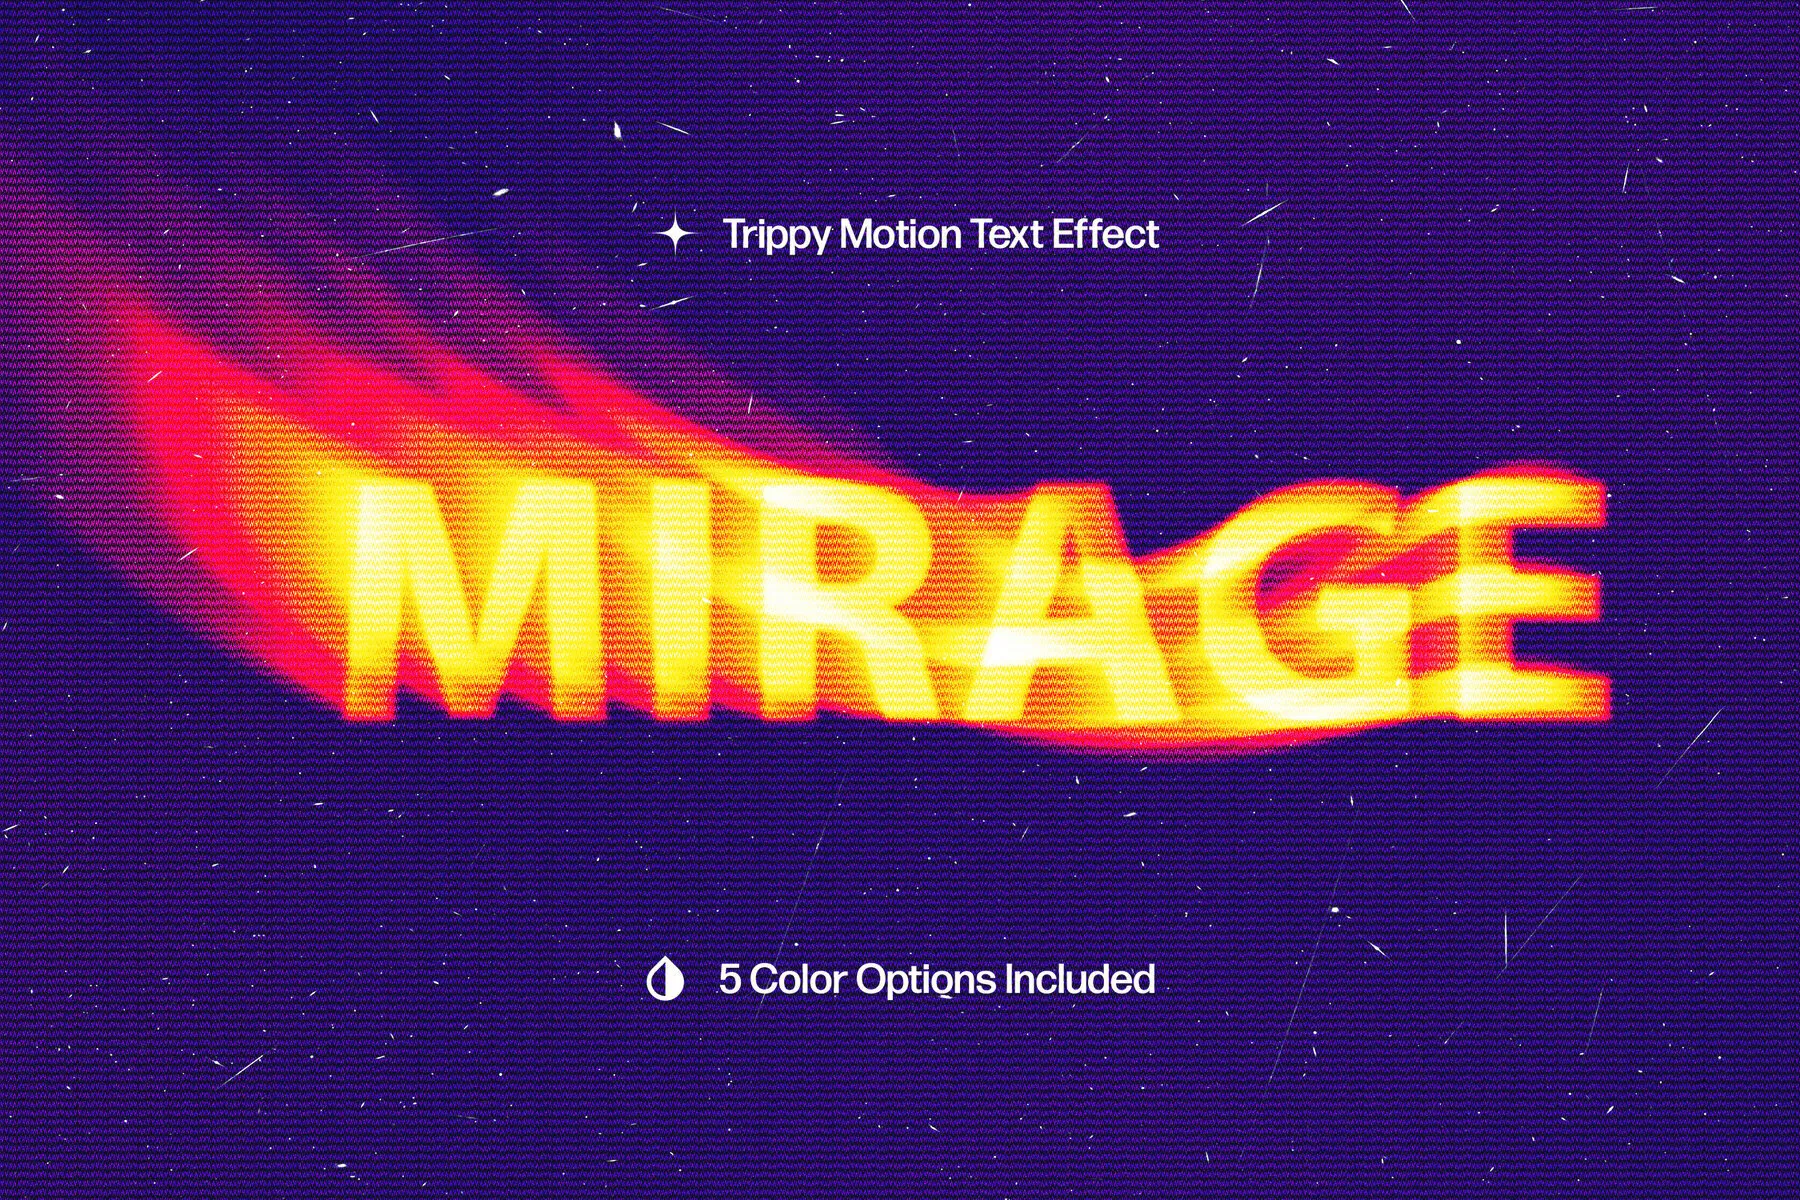 Trippy Motion Text Effect